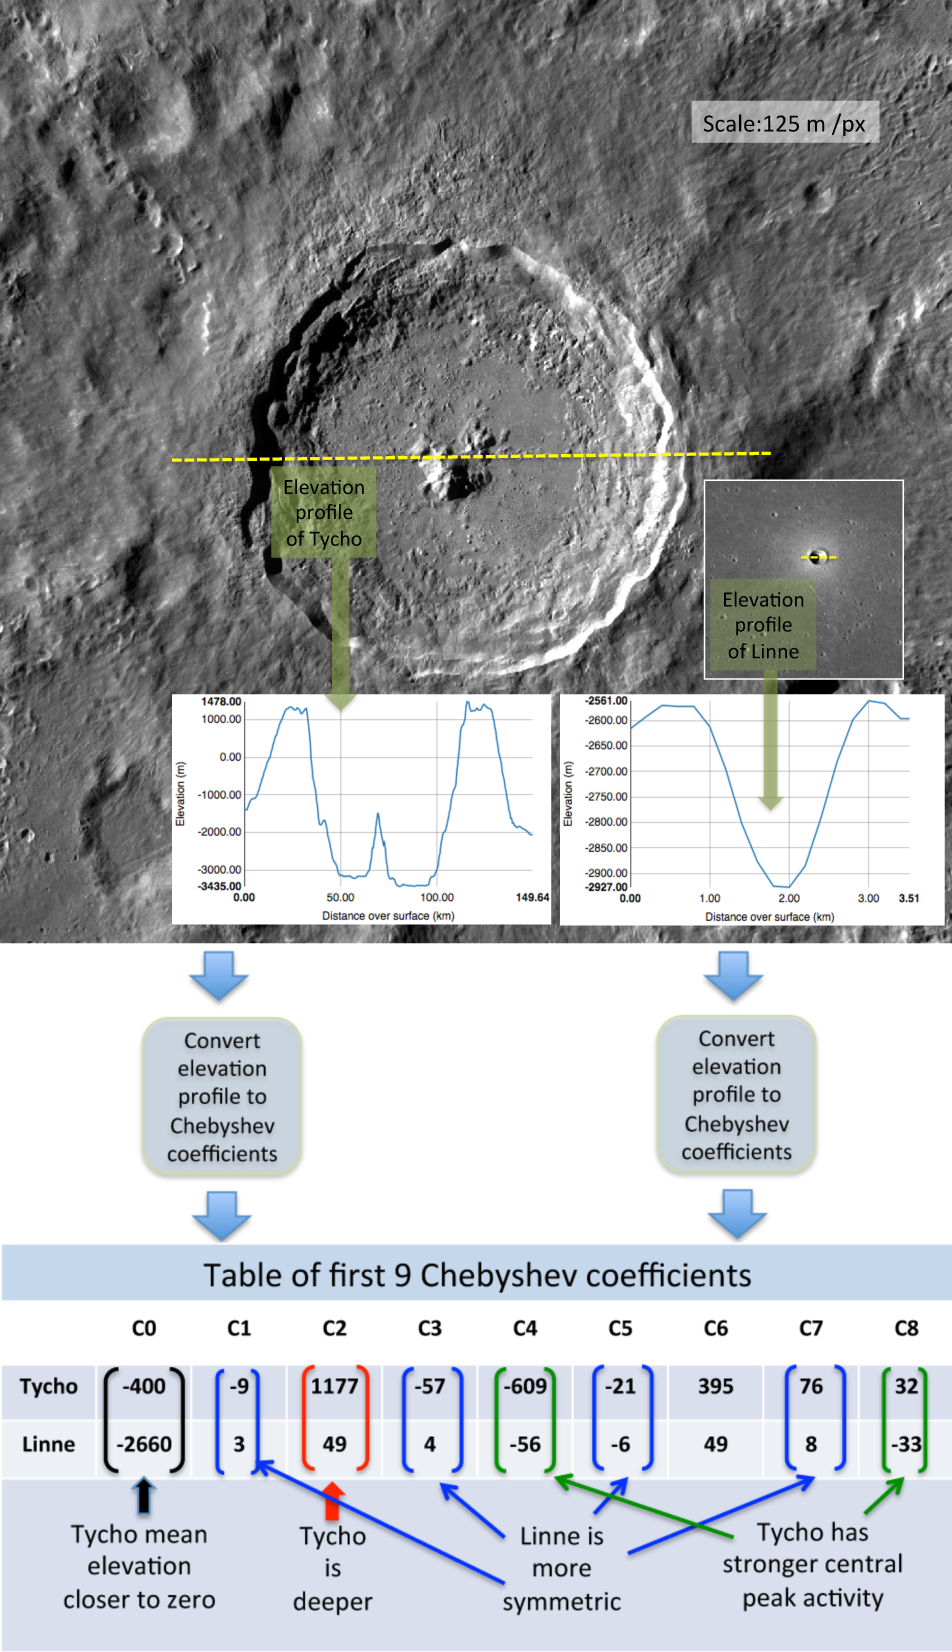 analysis of two craters